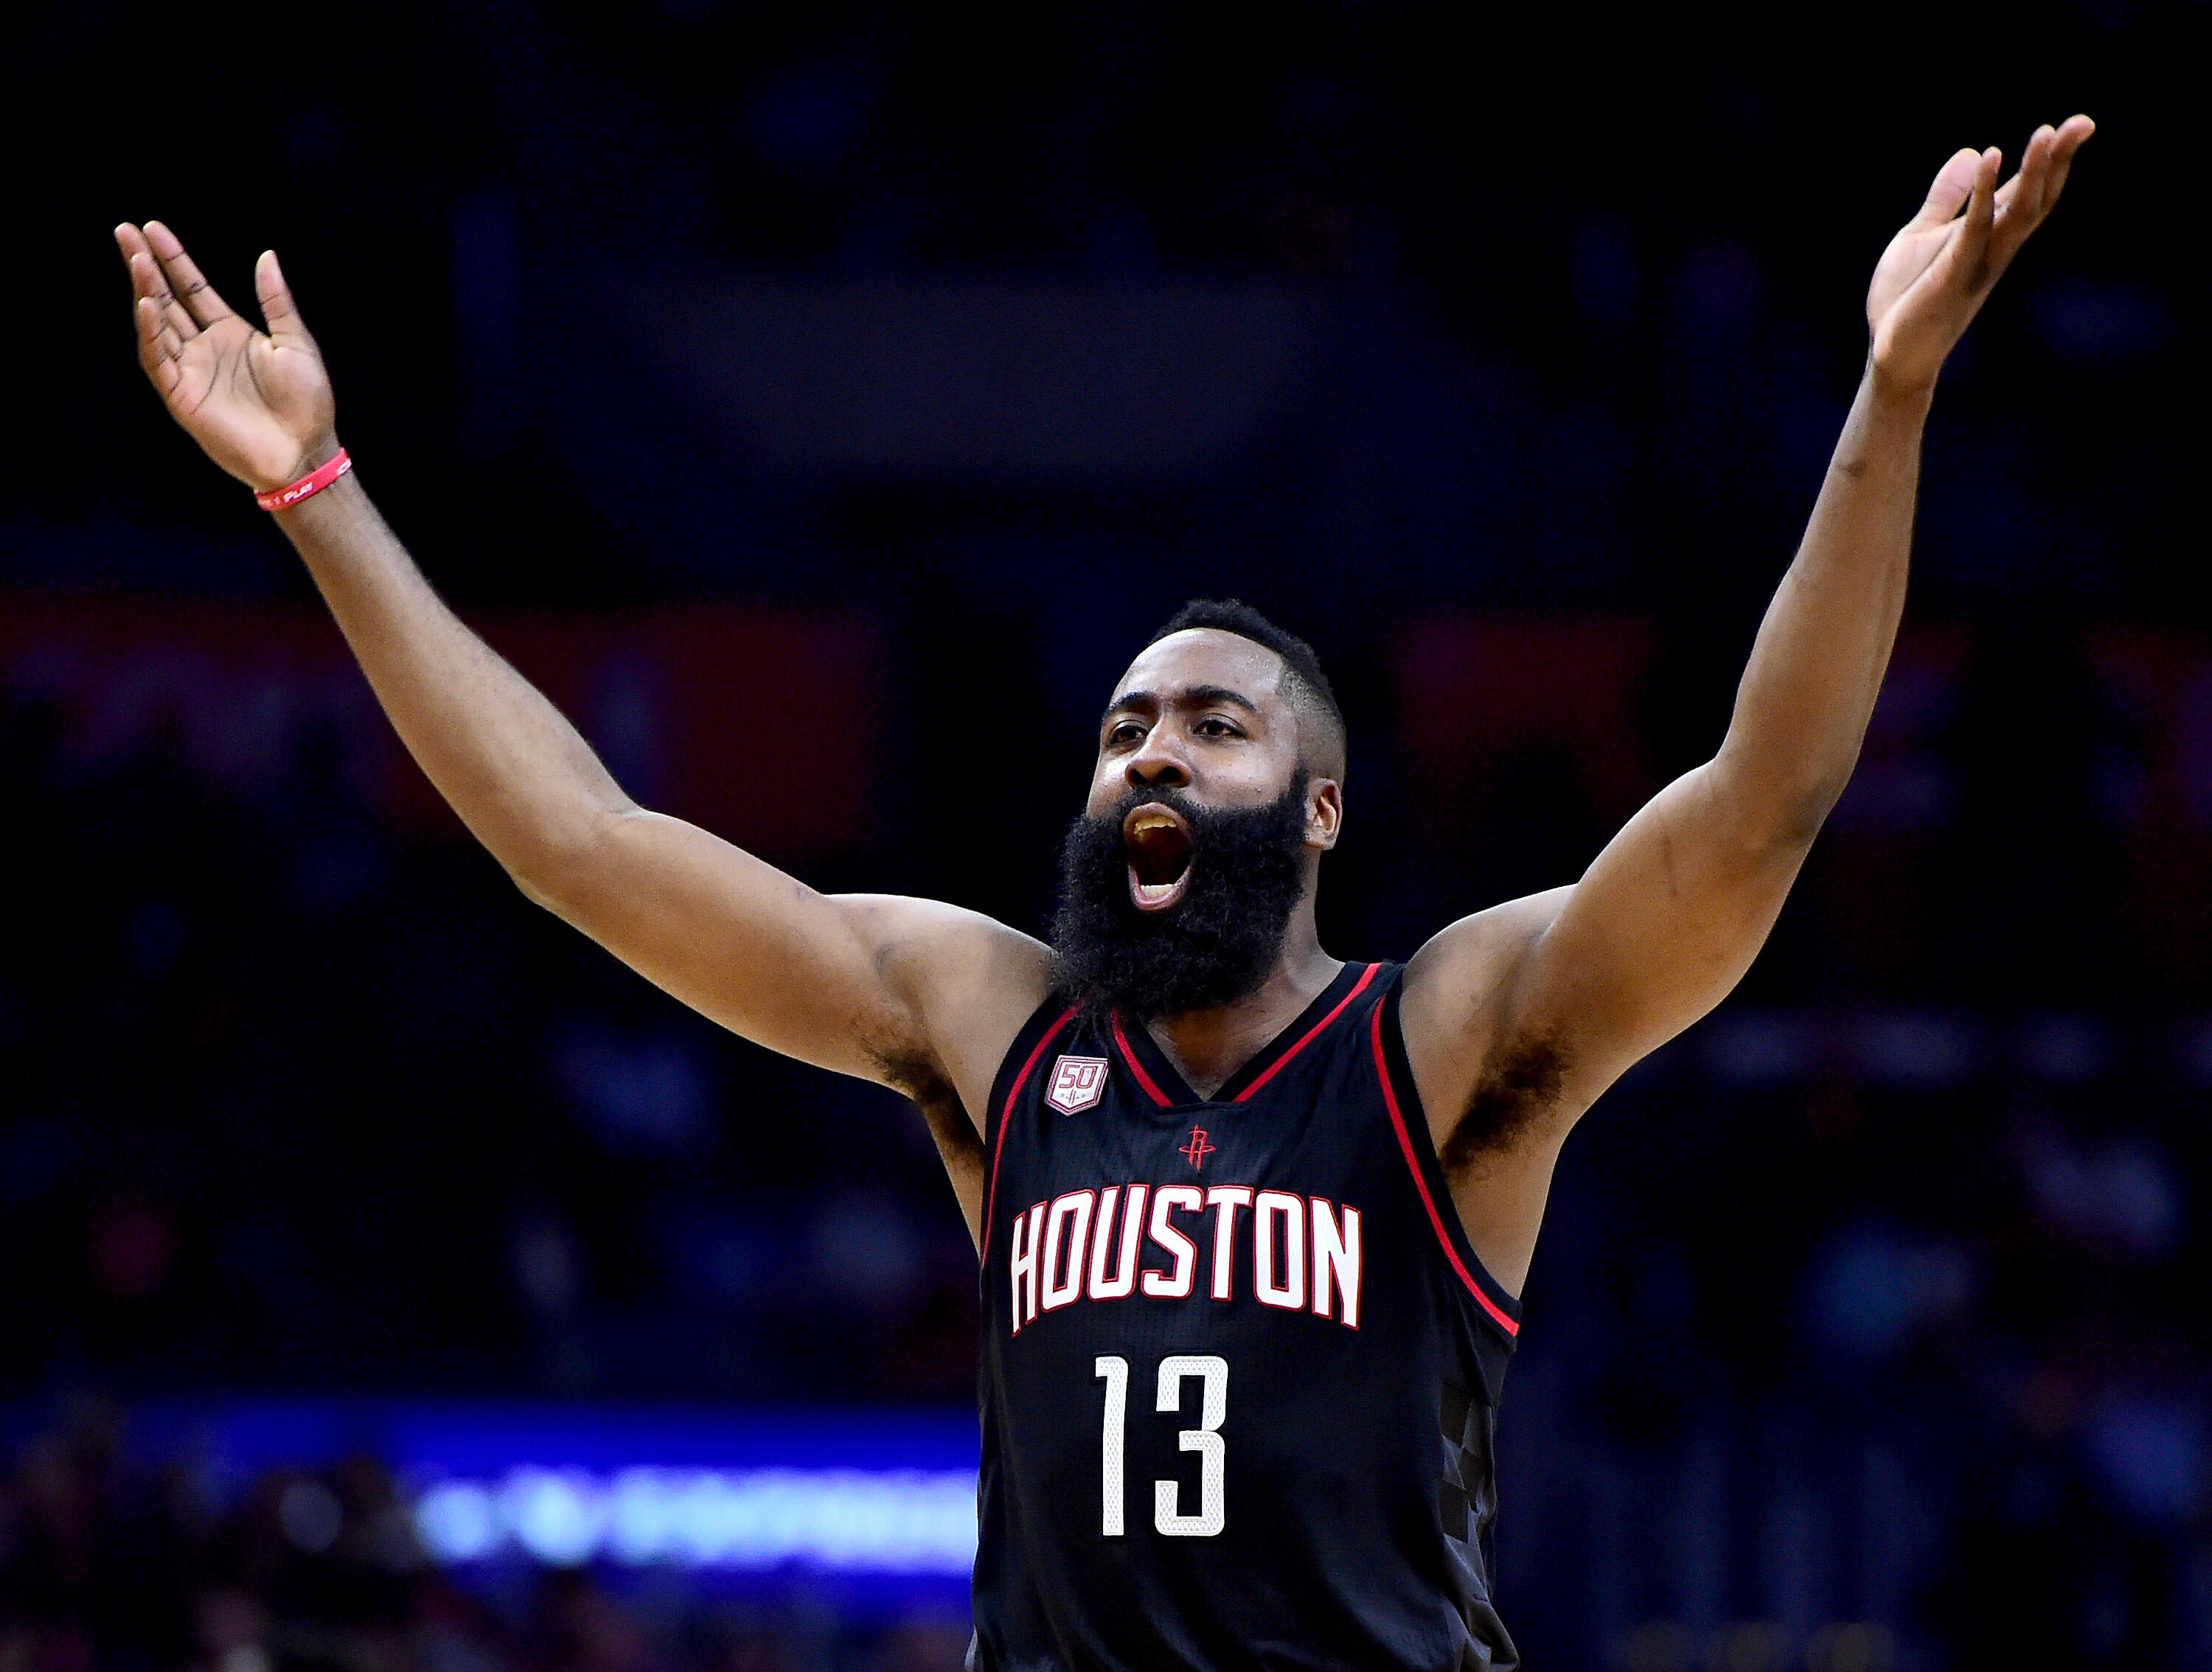 LOS ANGELES, CA - MARCH 01:  James Harden #13 of the Houston Rockets celebrates a three pointer during a 122-103 win over the LA Clippers at Staples Center on March 1, 2017 in Los Angeles, California.  NOTE TO USER: User expressly acknowledges and agrees 